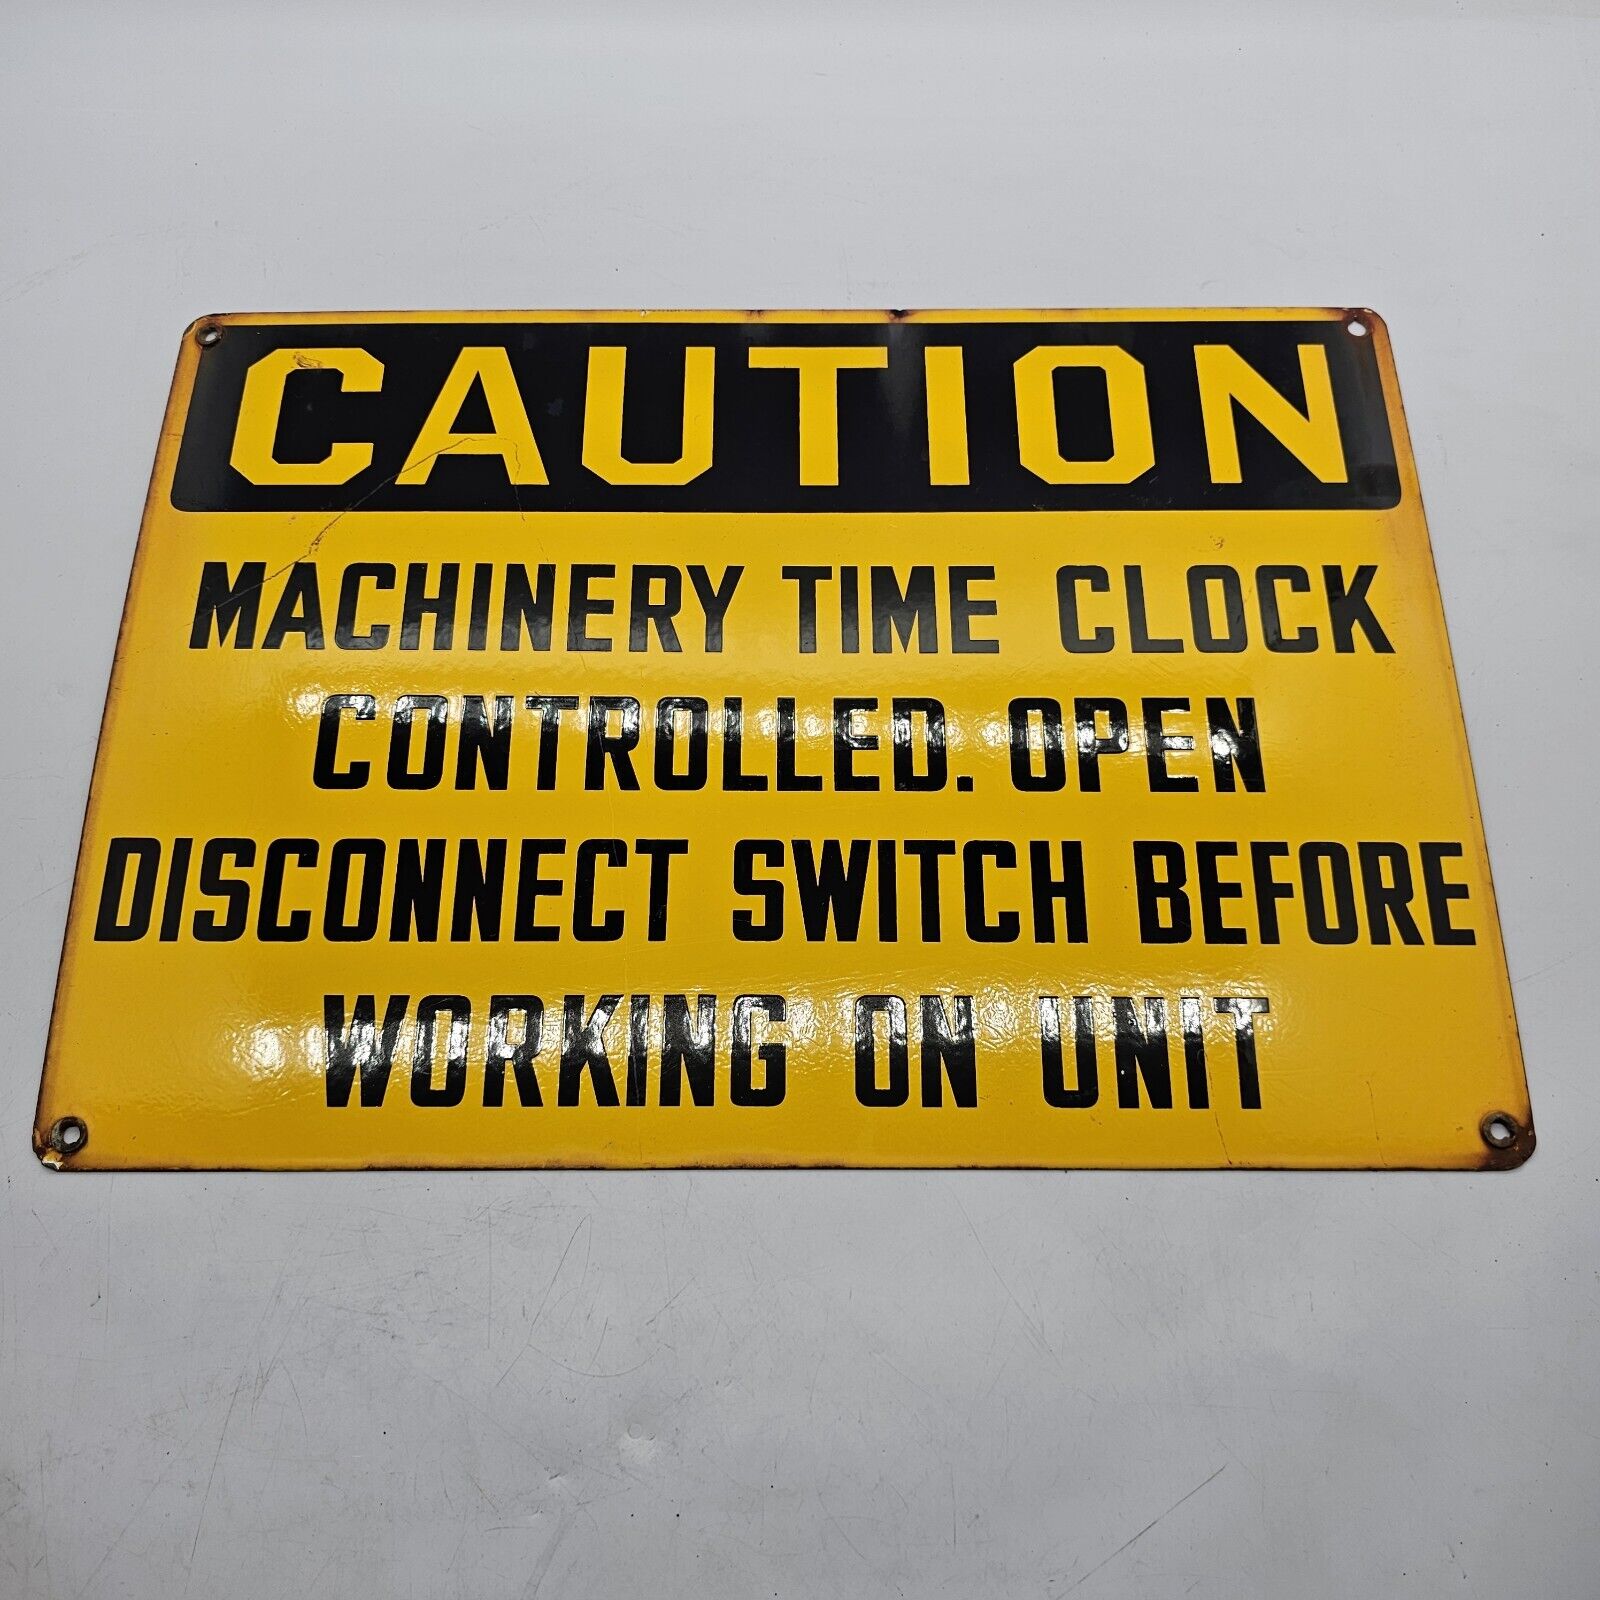 Porcelain OILFIELD CAUTION SIGN “Machinery Time Clock Controlled ” 20x14